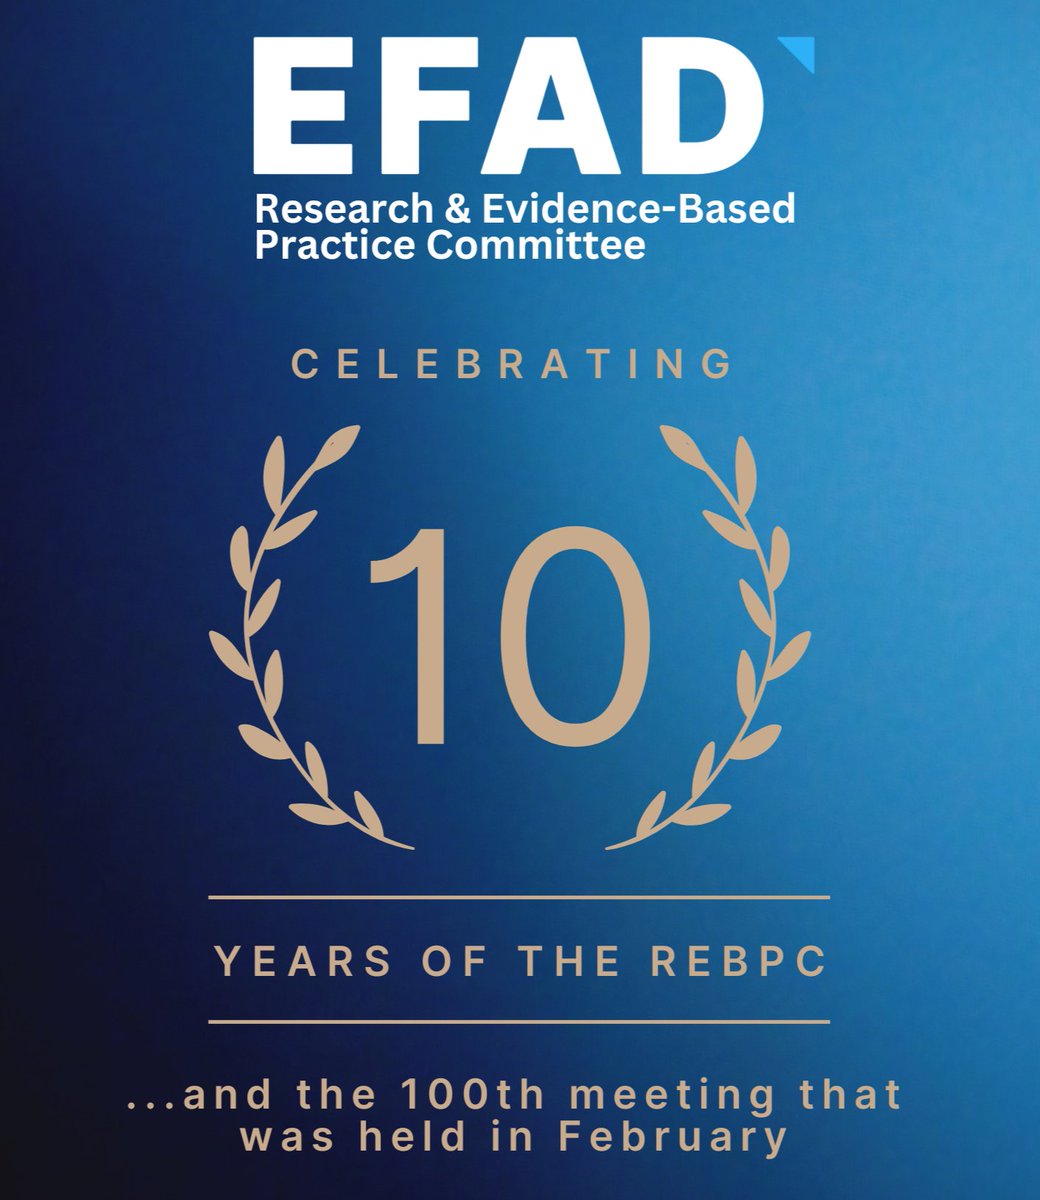 It is a privilege to Chair this dynamic committee within @efad_org and contribute to the EFAD Executive. 10 years young 🎂and looking forward to many more advancing evidence-based practice and research in dietetics 🥳 @trust_indi @BDA_Dietitians @ucdagfood